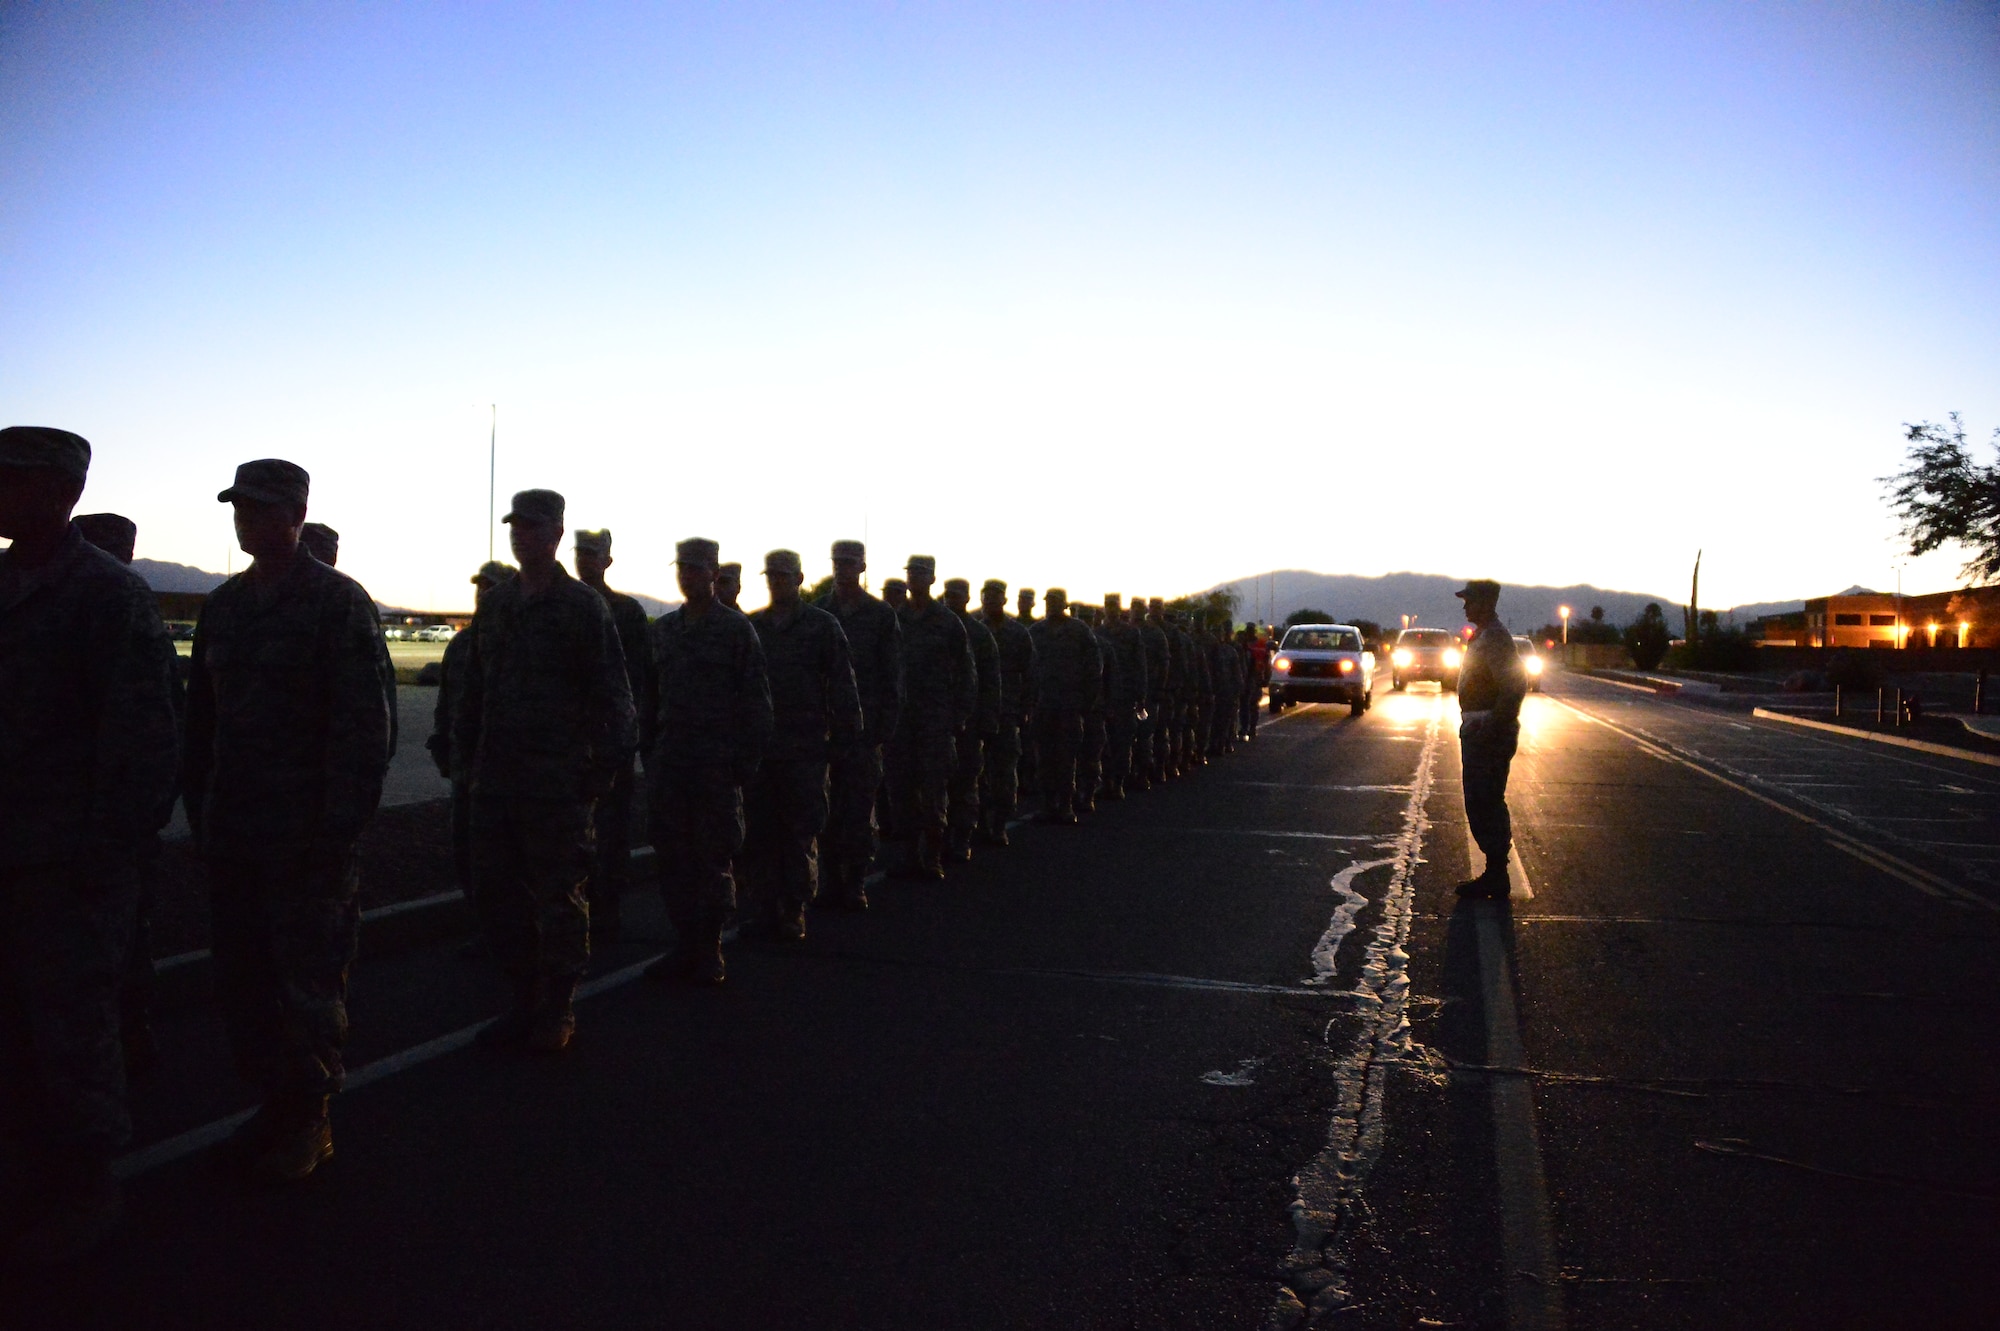 Members of the 612th Air Communication Squadron march around Davis-Monthan AFB, Ariz., in remembrance of the 9/11 victims, Sept. 11, 2014. As members marched they recalled where they were during the attacks. (USAF photo by Staff Sgt. Heather Redman/Released)